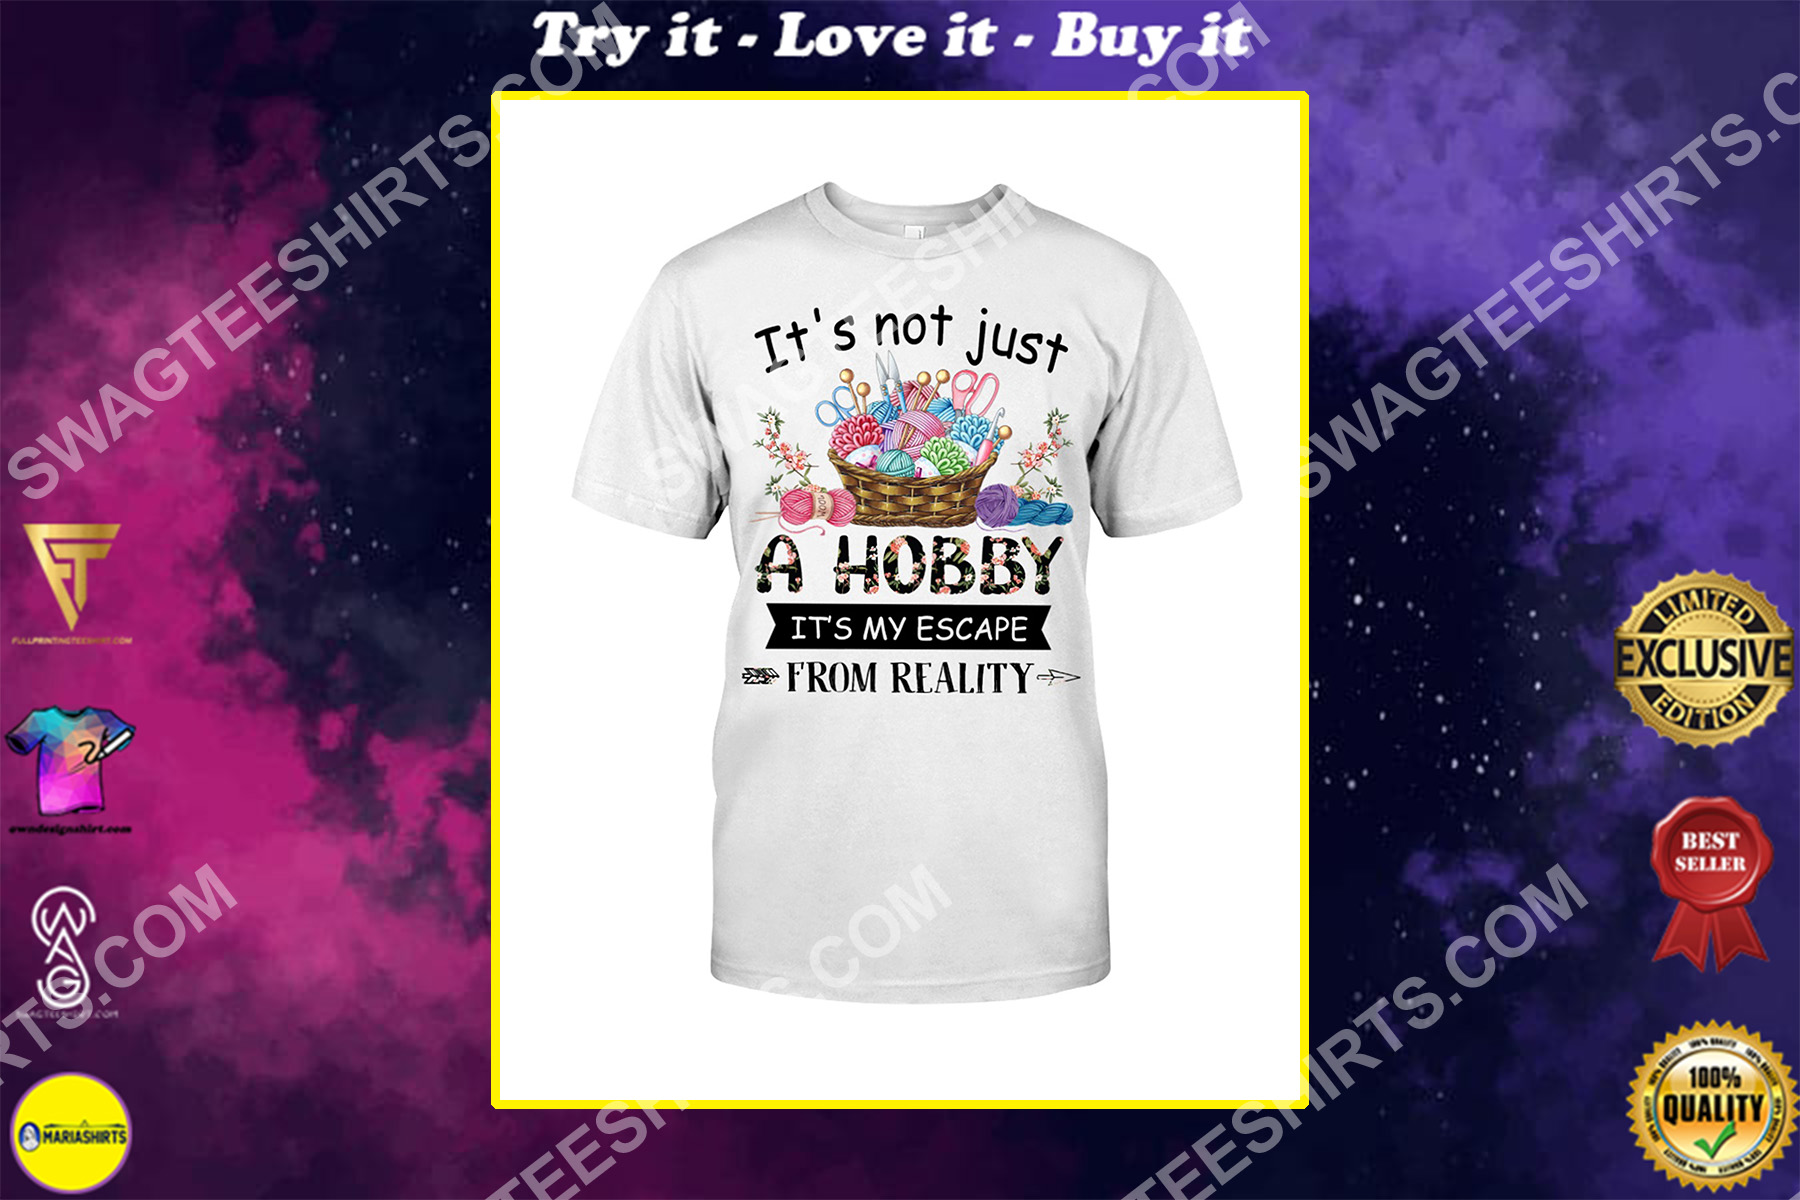 crochet and knitting it's not just a hobby it's my escape from reality shirt